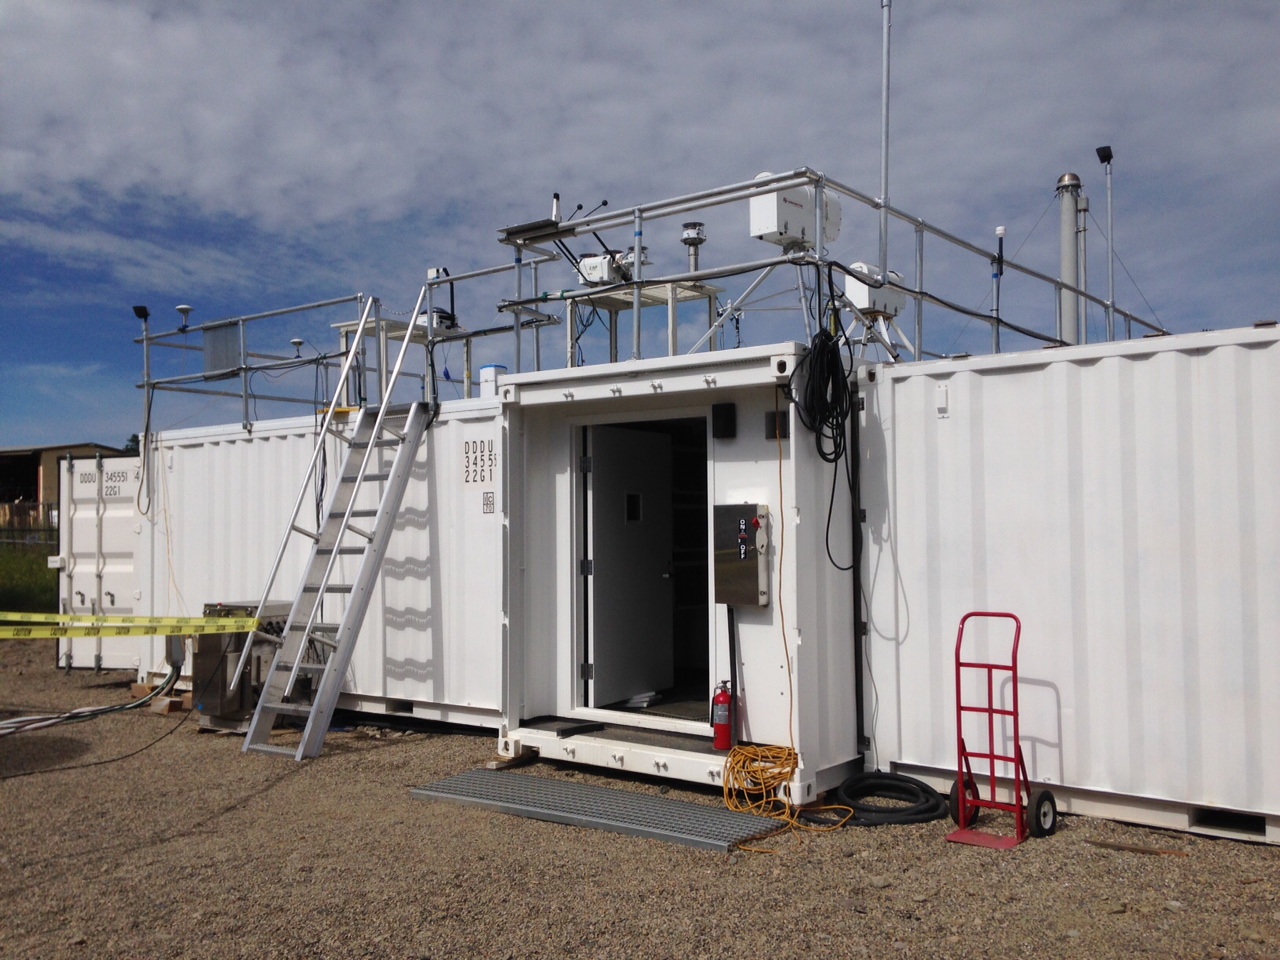 Testing the AMF2 deployment for COS-RAY in Pagosa Springs, Colorado - Photo taken and provided as courtesy of Ryan Scott (SIO) - July 2015